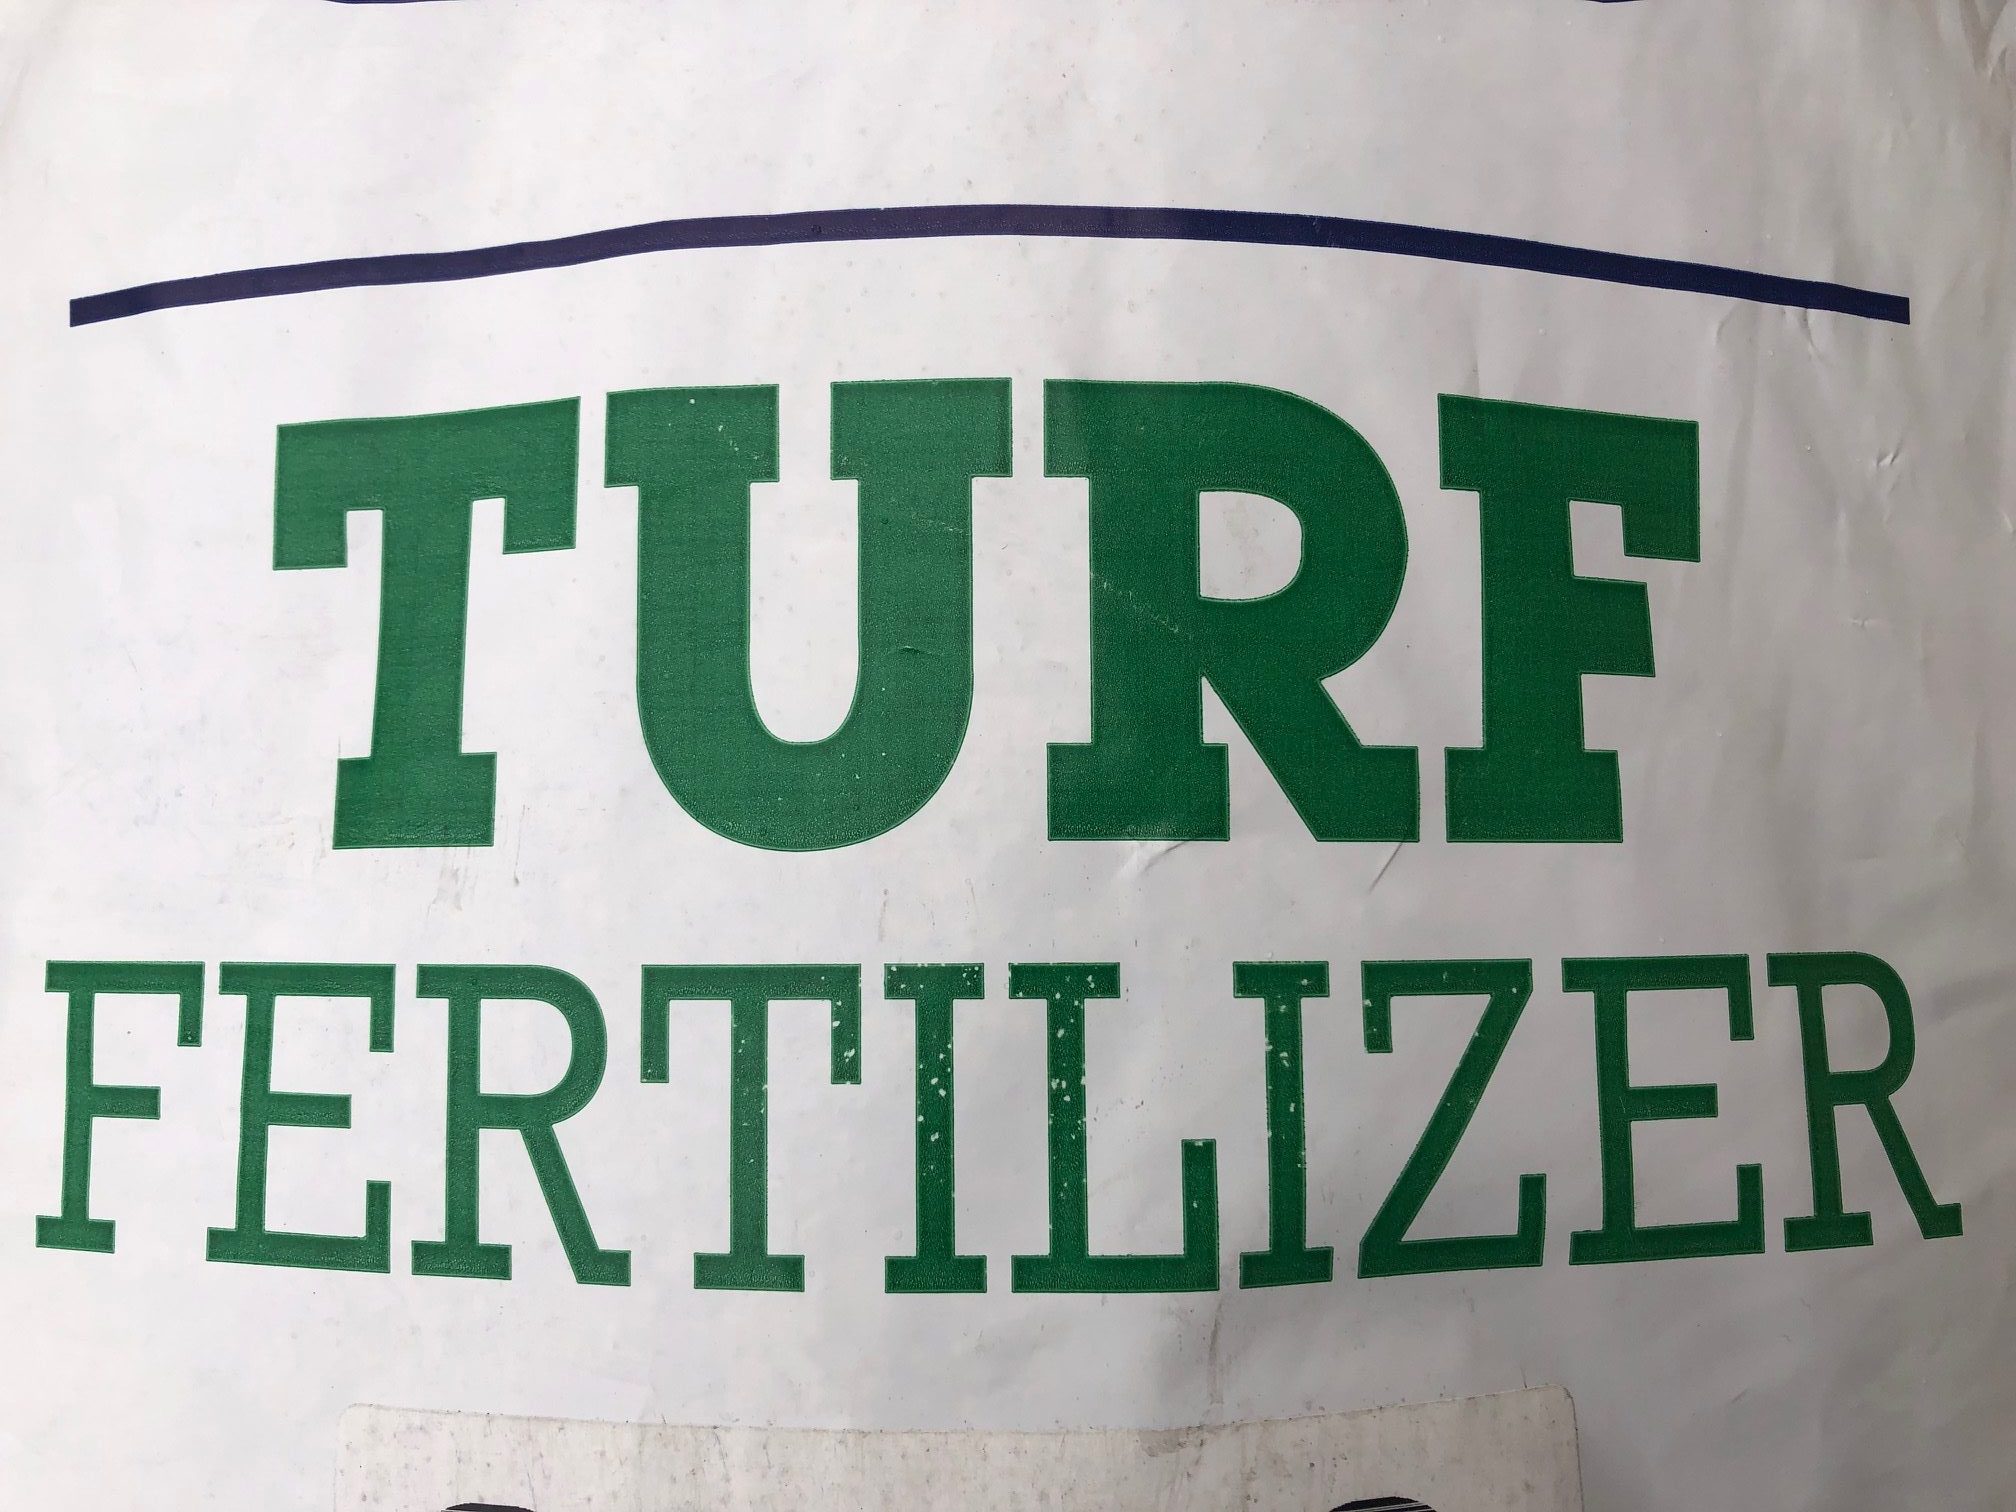 Are You Prepared to Comply with the New Jersey Fertilizer Laws